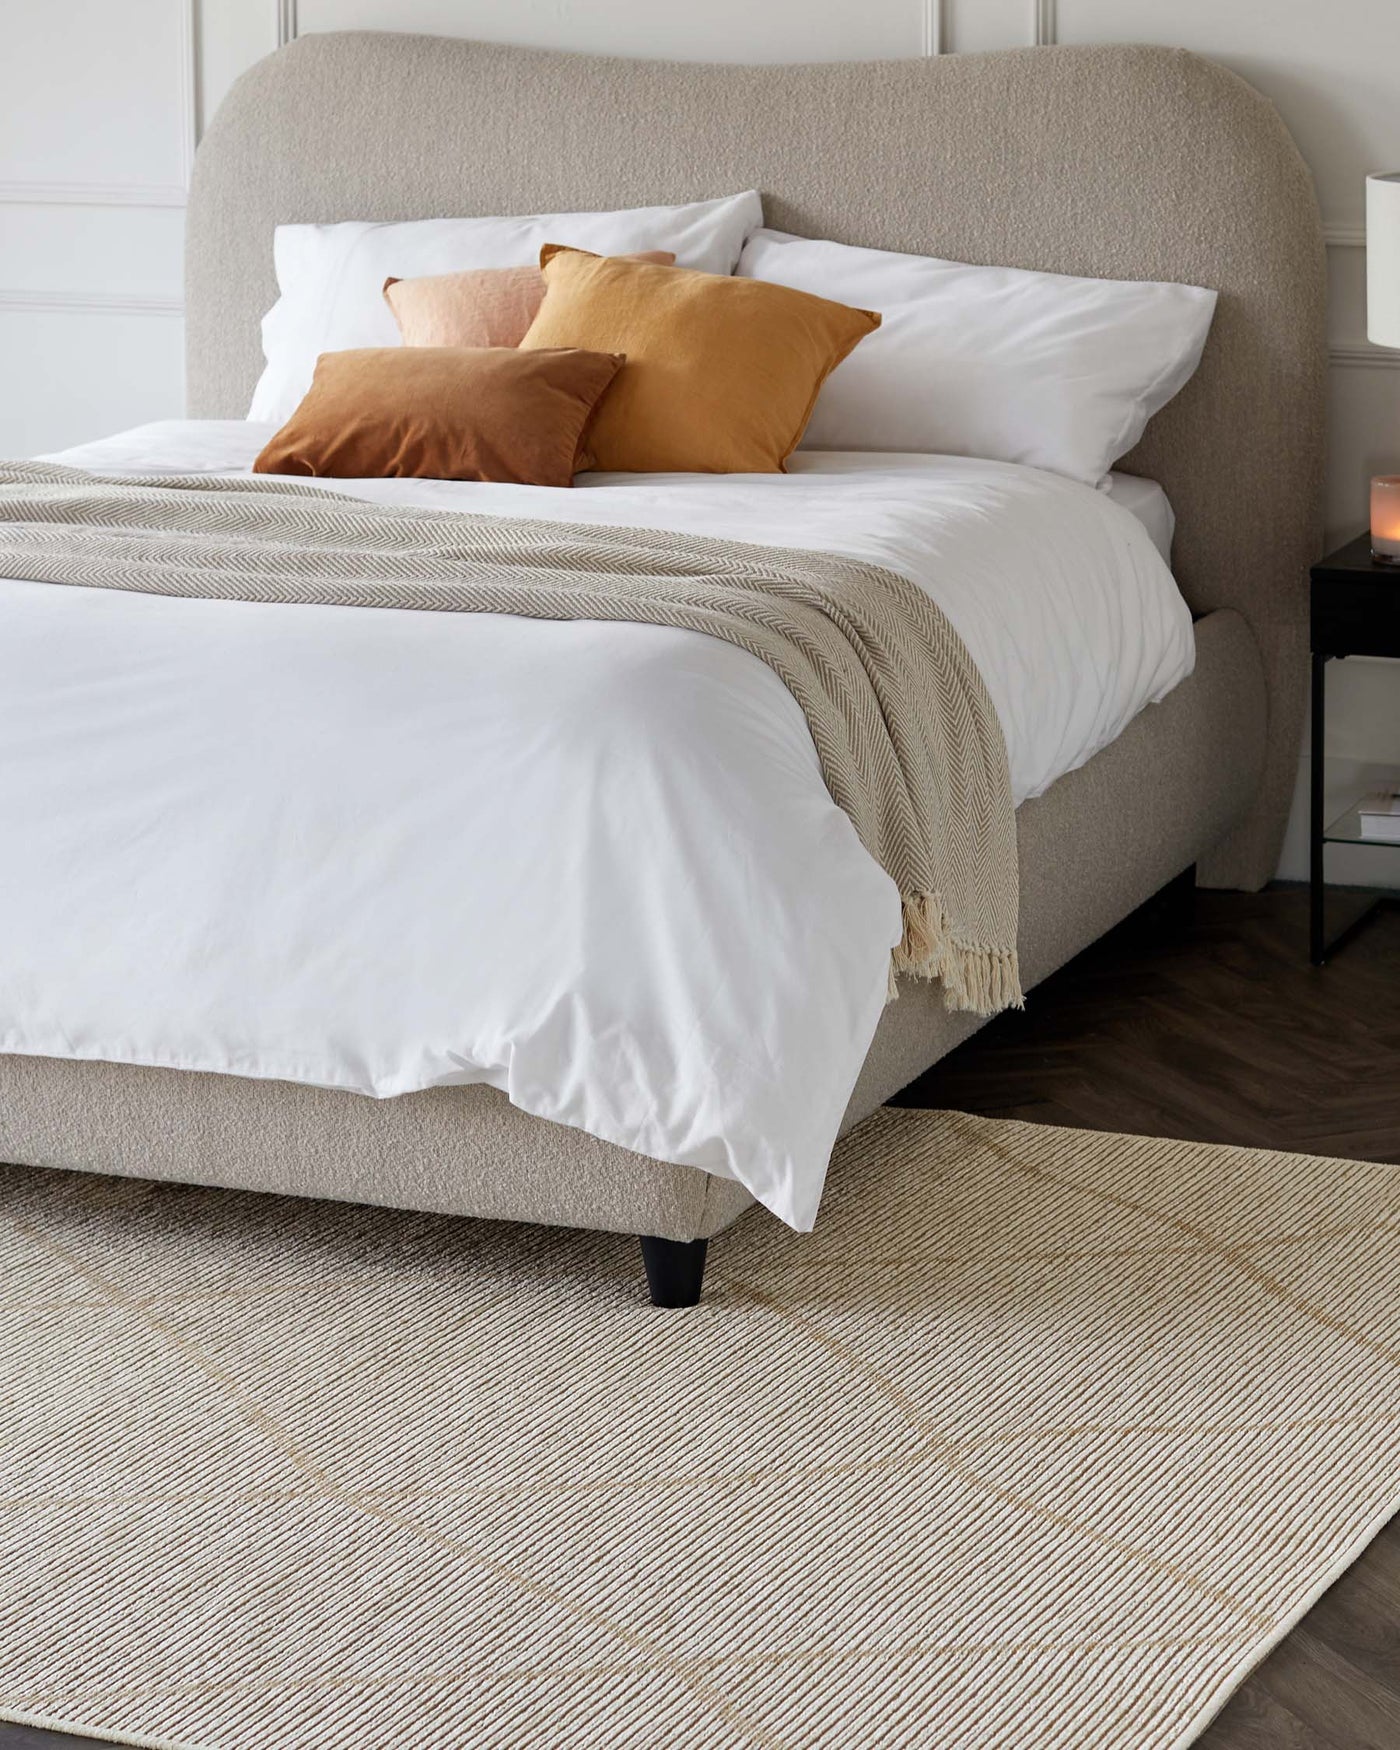 Contemporary upholstered platform bed with a curved headboard, neatly dressed with white and mustard bedding, accompanied by two textured throw pillows, and completed with a fringed throw blanket. The bed stands on simple dark legs, all set atop a textured beige area rug.